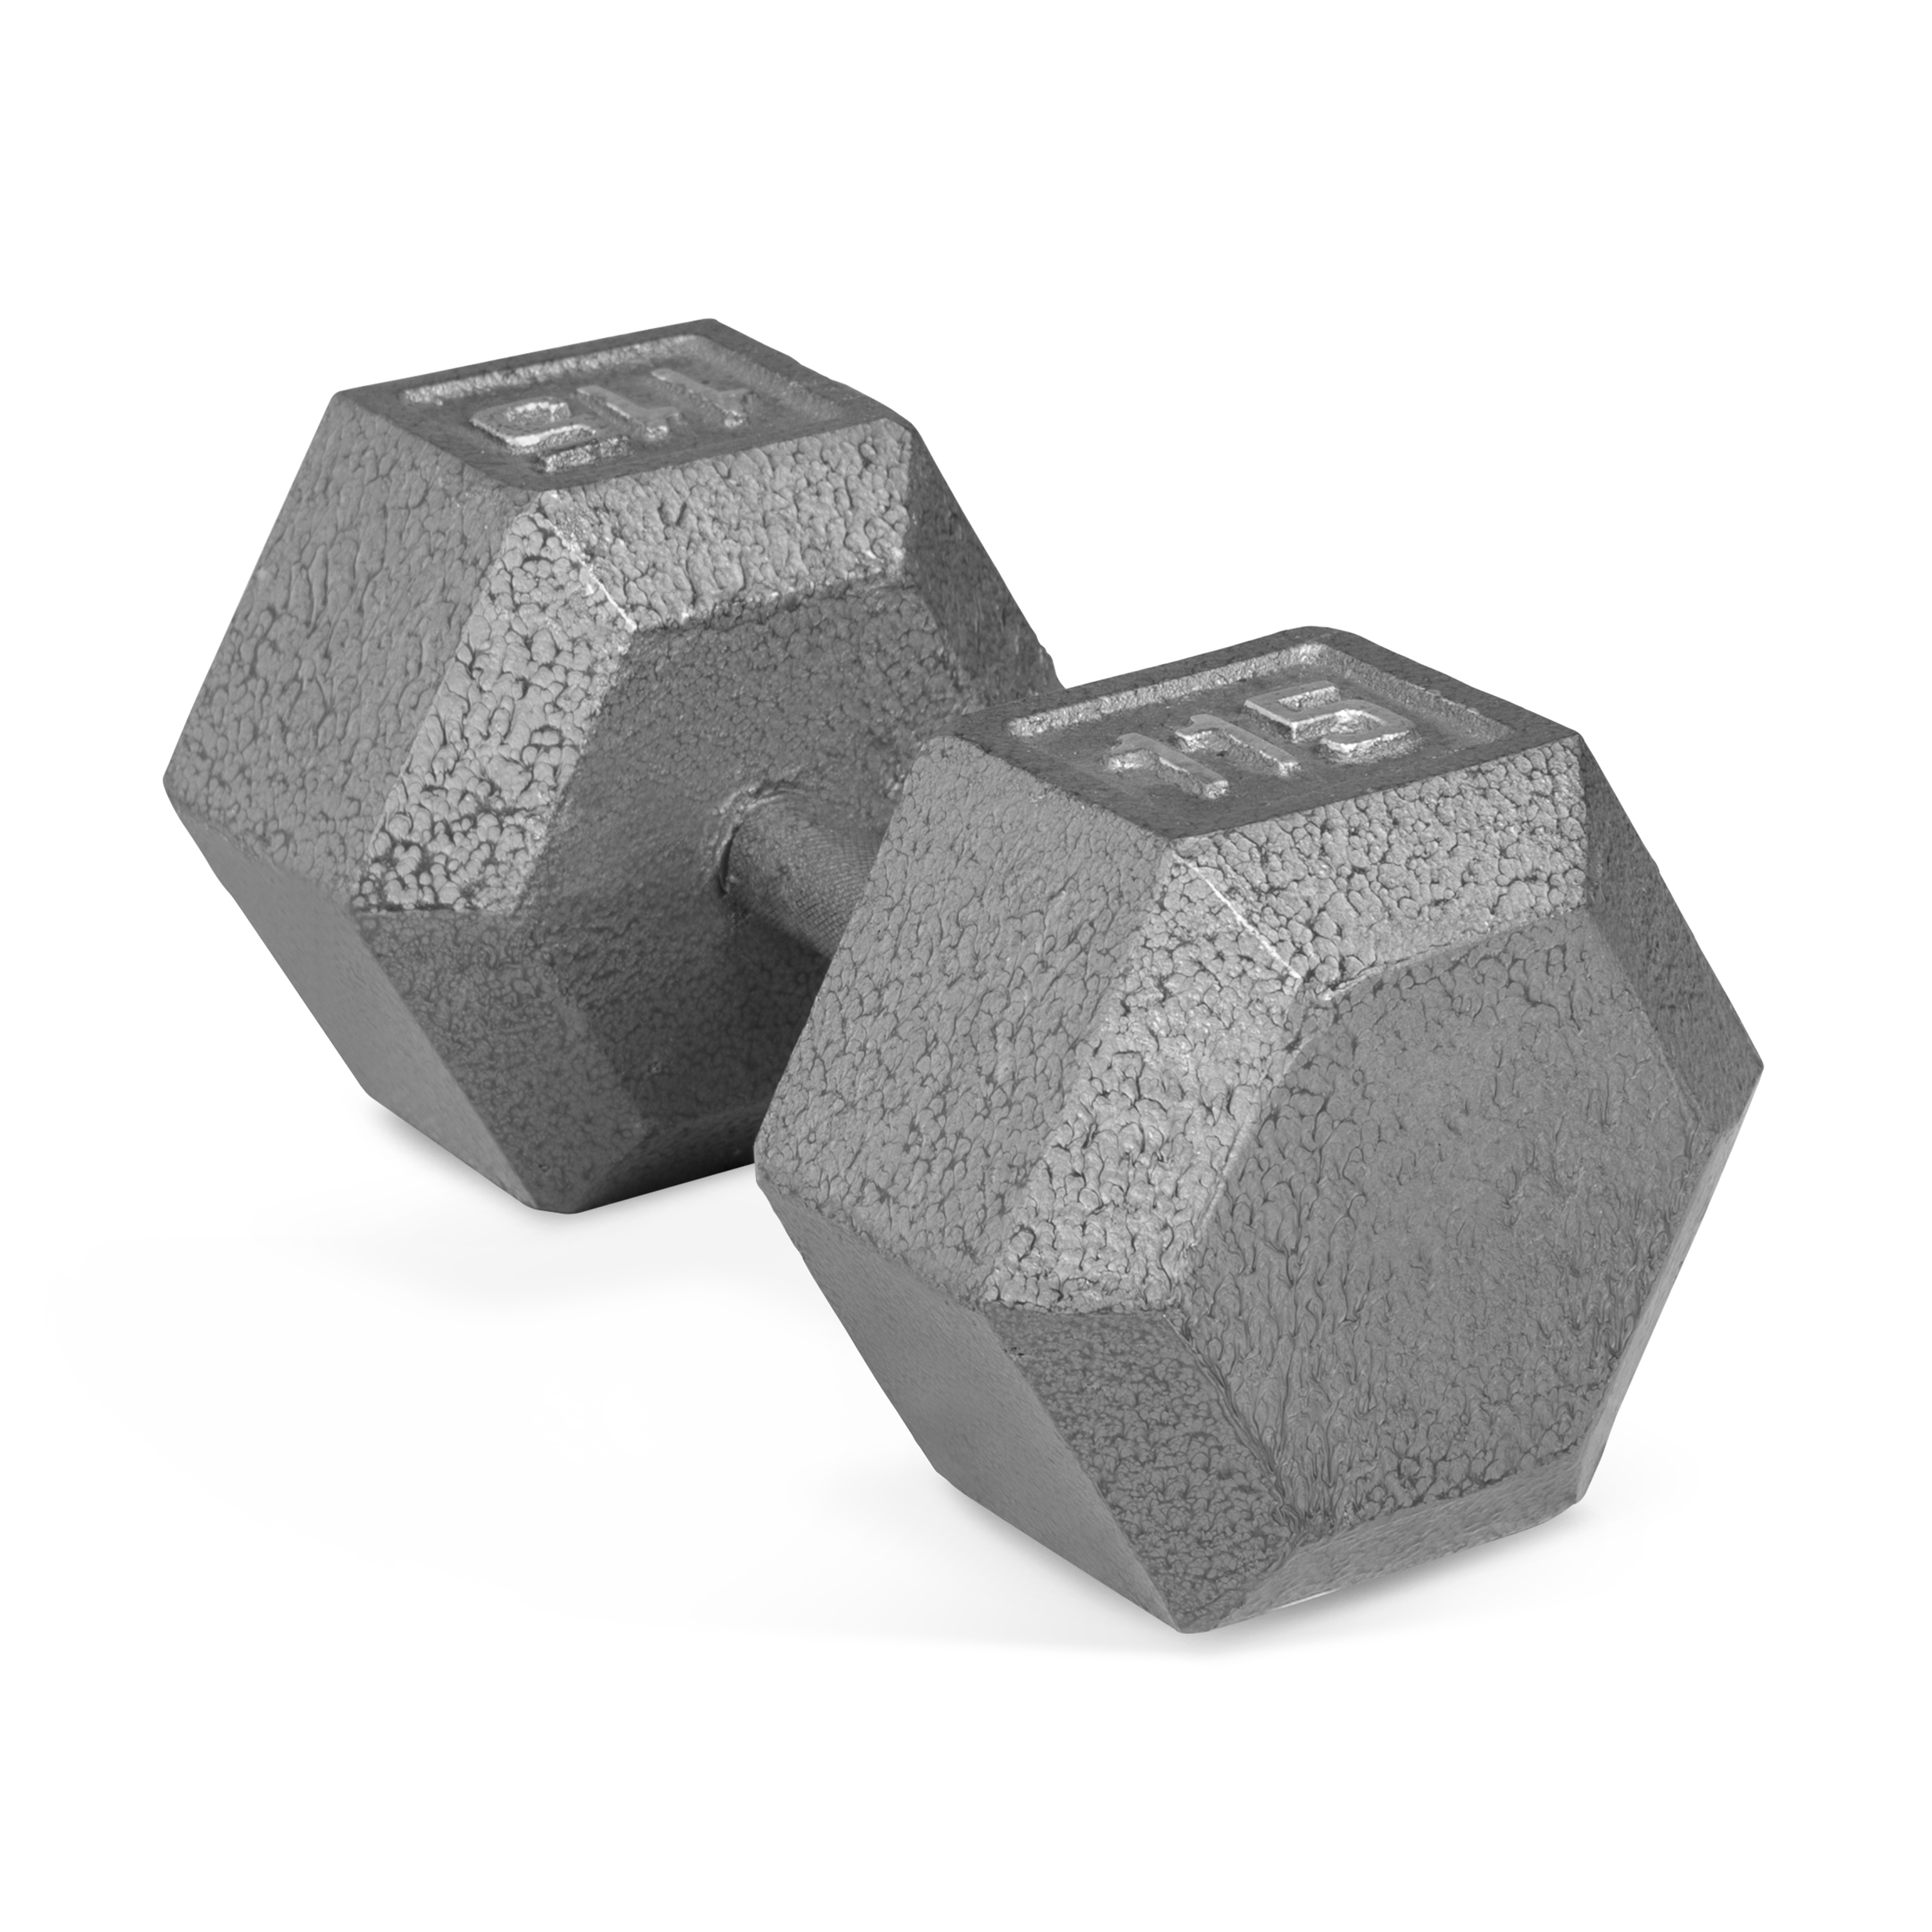 CAP Barbell 115lb Cast Iron Hex Dumbbell, Single - image 1 of 6